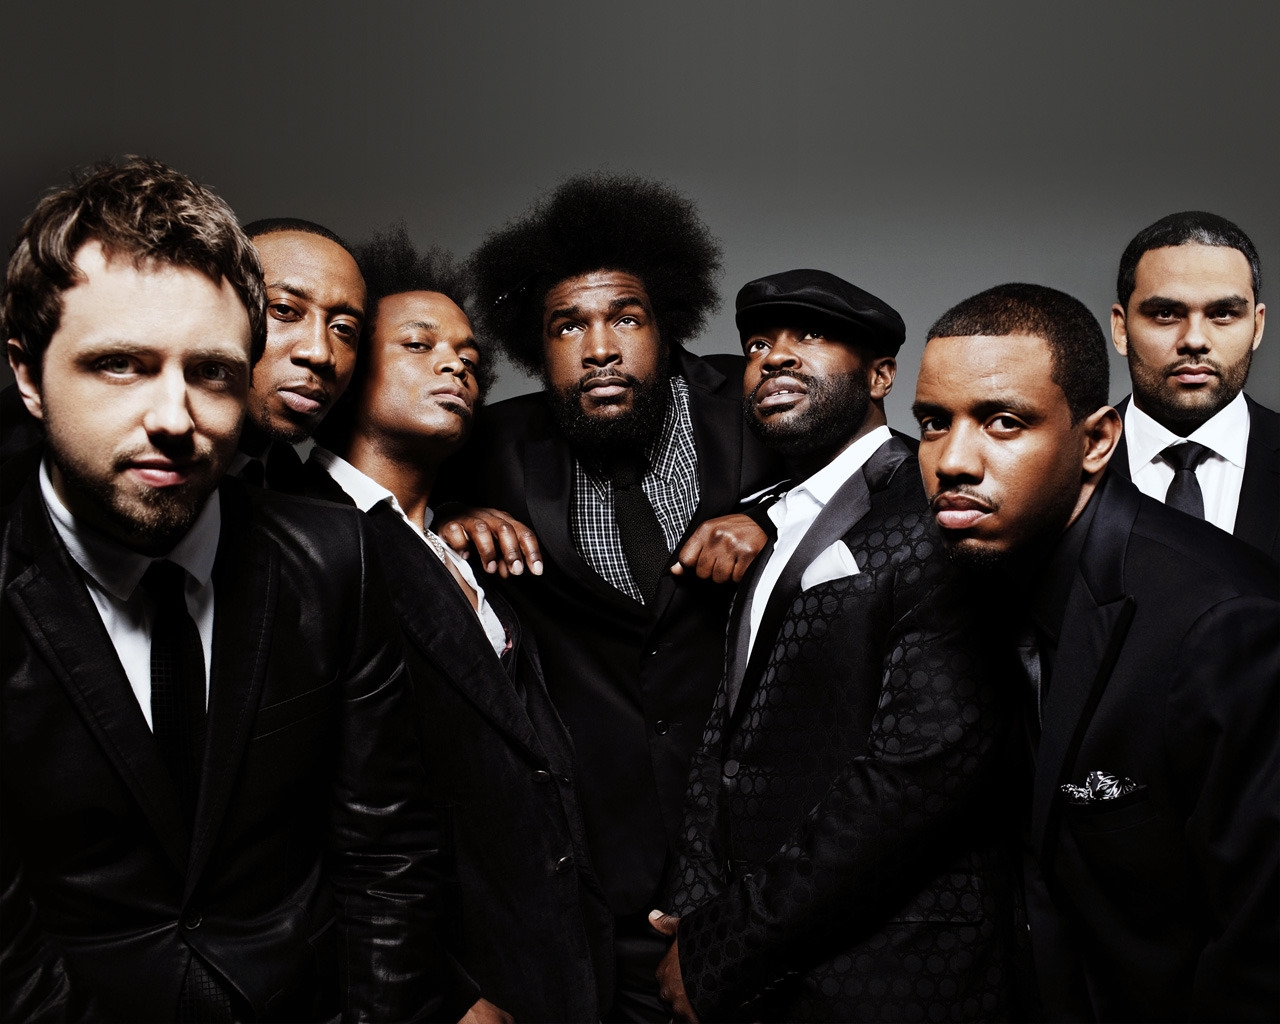 The Roots Band Photo Session for 1280 x 1024 resolution